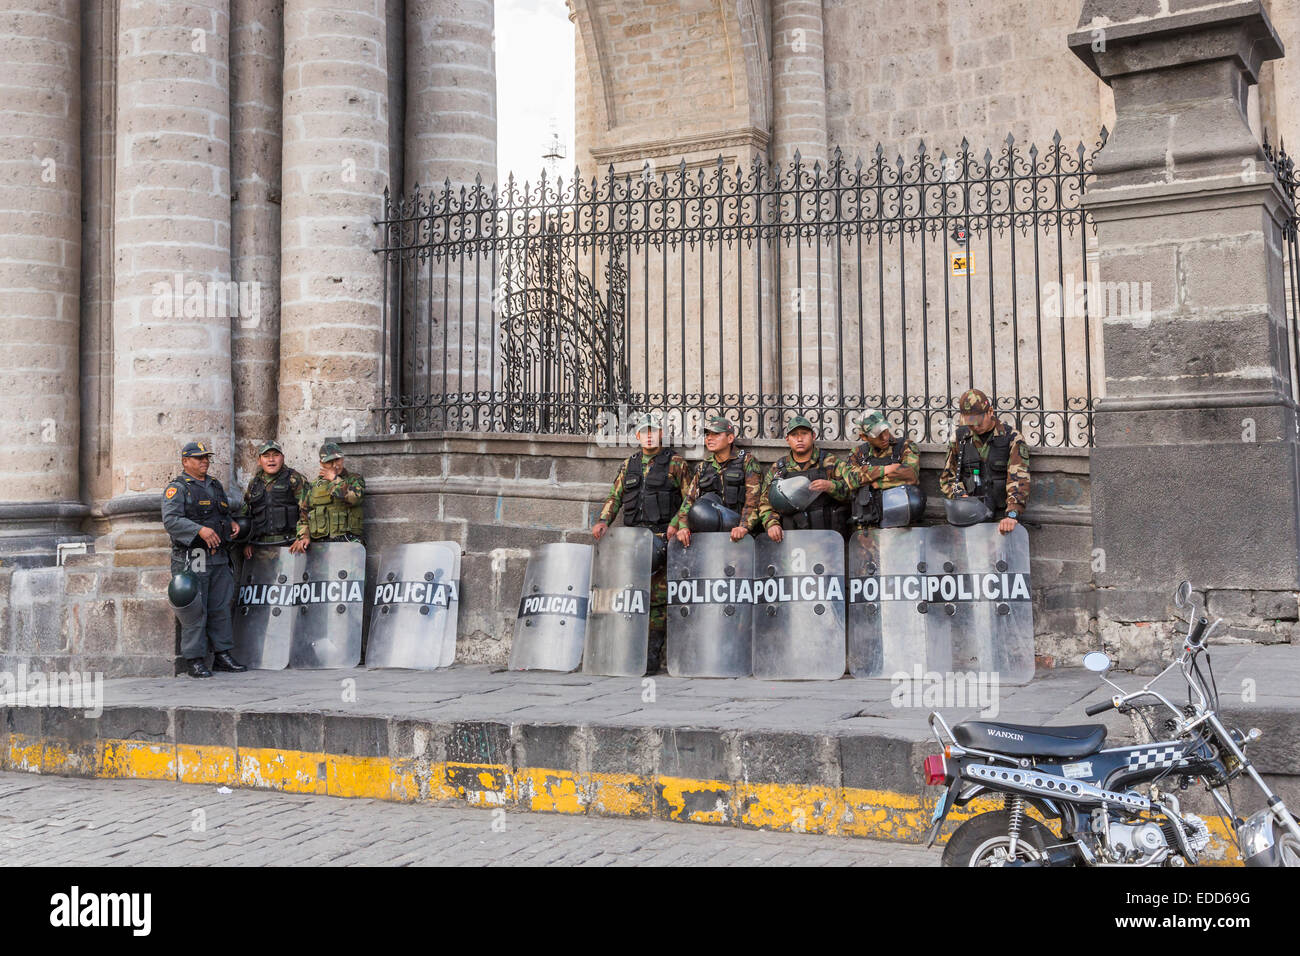 Peruvian riot police wearing camouflage uniform with shields and helmets standing outside Arequipa Cathedral, Plaza de Armas, Arequipa, Peru Stock Photo